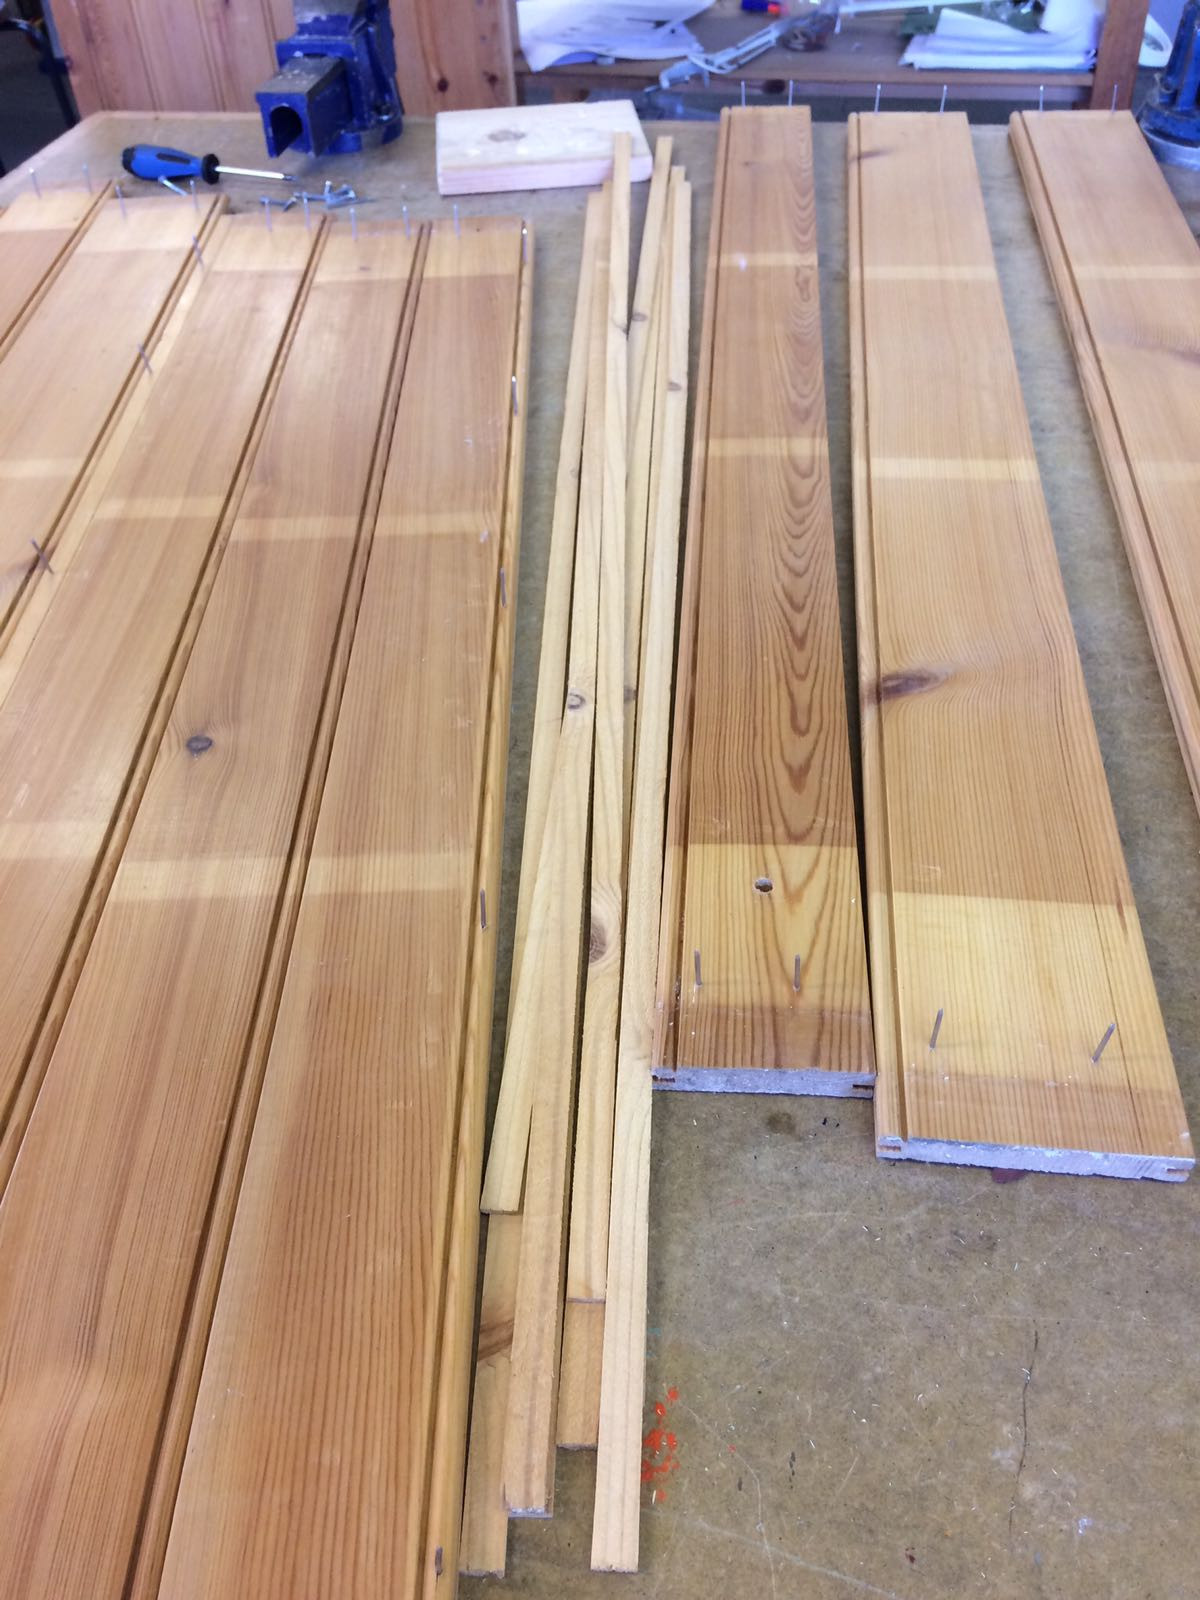 20 Popular Hardwood Floor Refinishing Bowling Green Ky 2024 free download hardwood floor refinishing bowling green ky of http imgur com gallery rwr0h daily http imgur com p0wiq8l this with regard to 5rxkesl